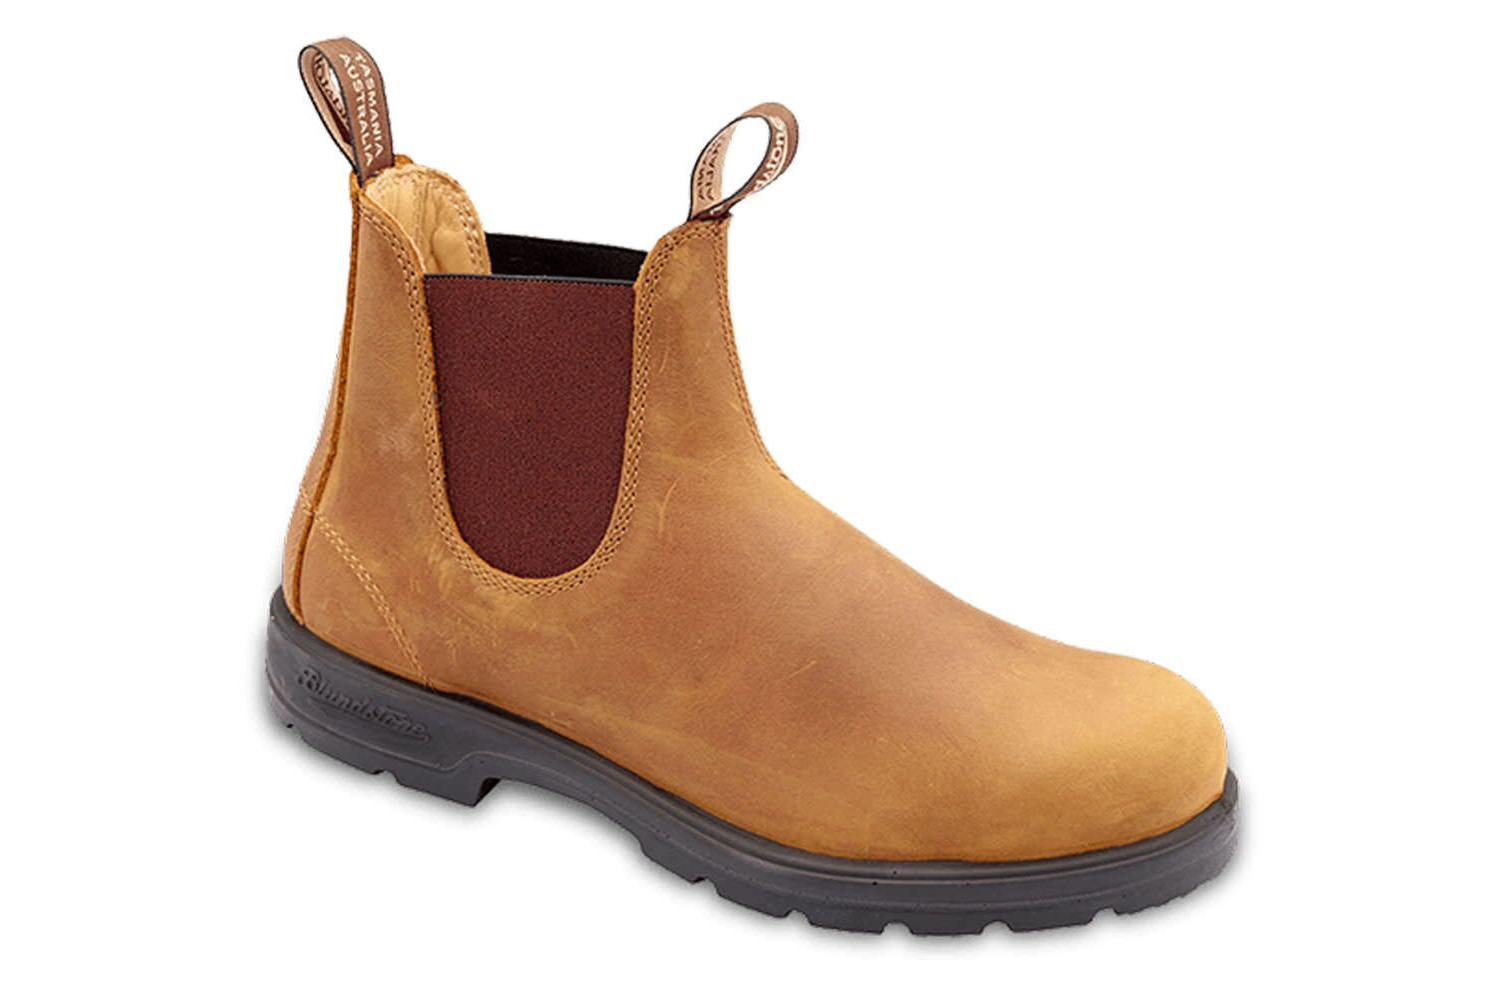 blundstone boots comfortable